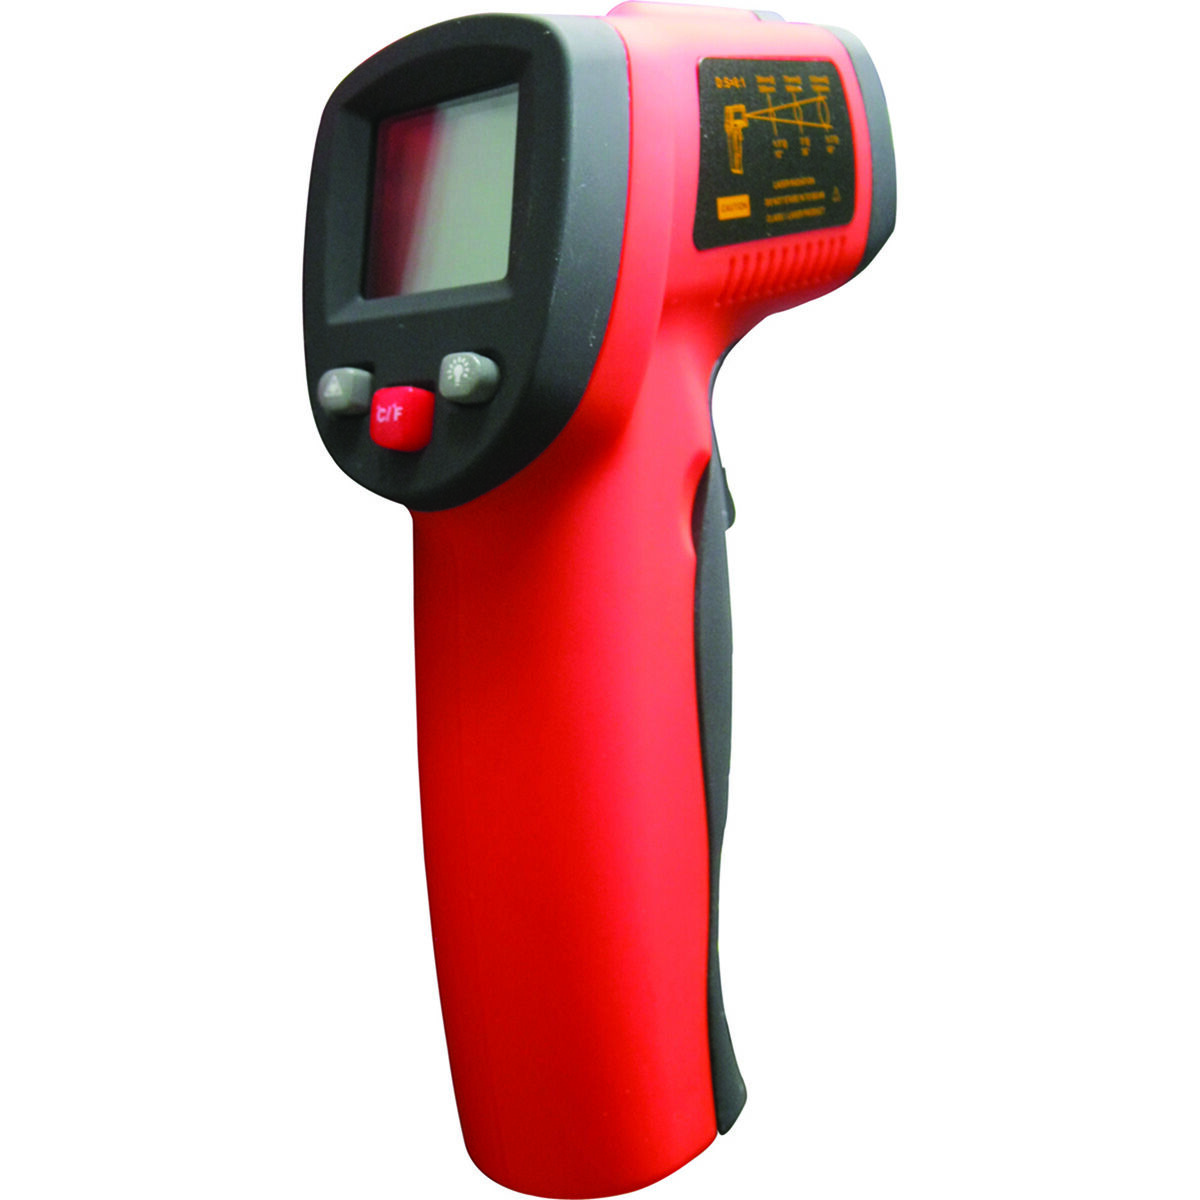 Pen Type Mini Infrared Thermometer IR Temperature Measuring LCD Display Tools 